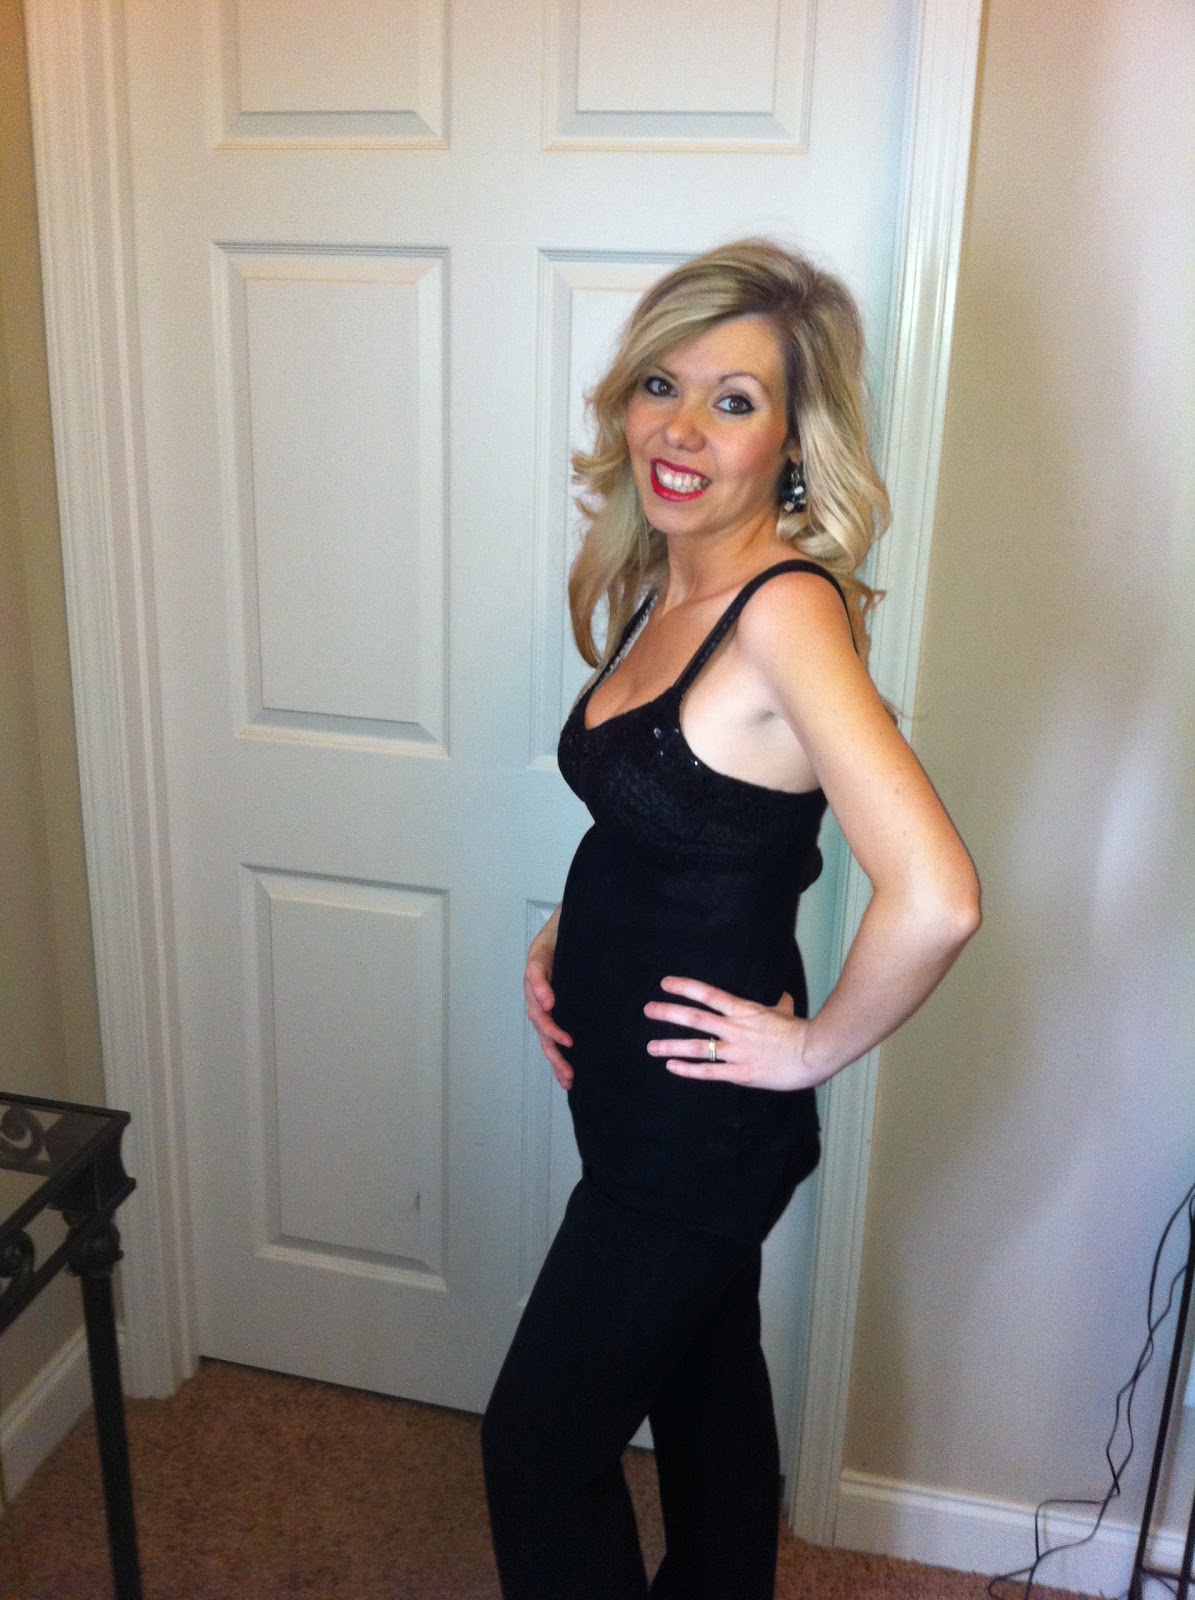 KELLY HAS A BELLY: 15 WEEKS PREGNANT!